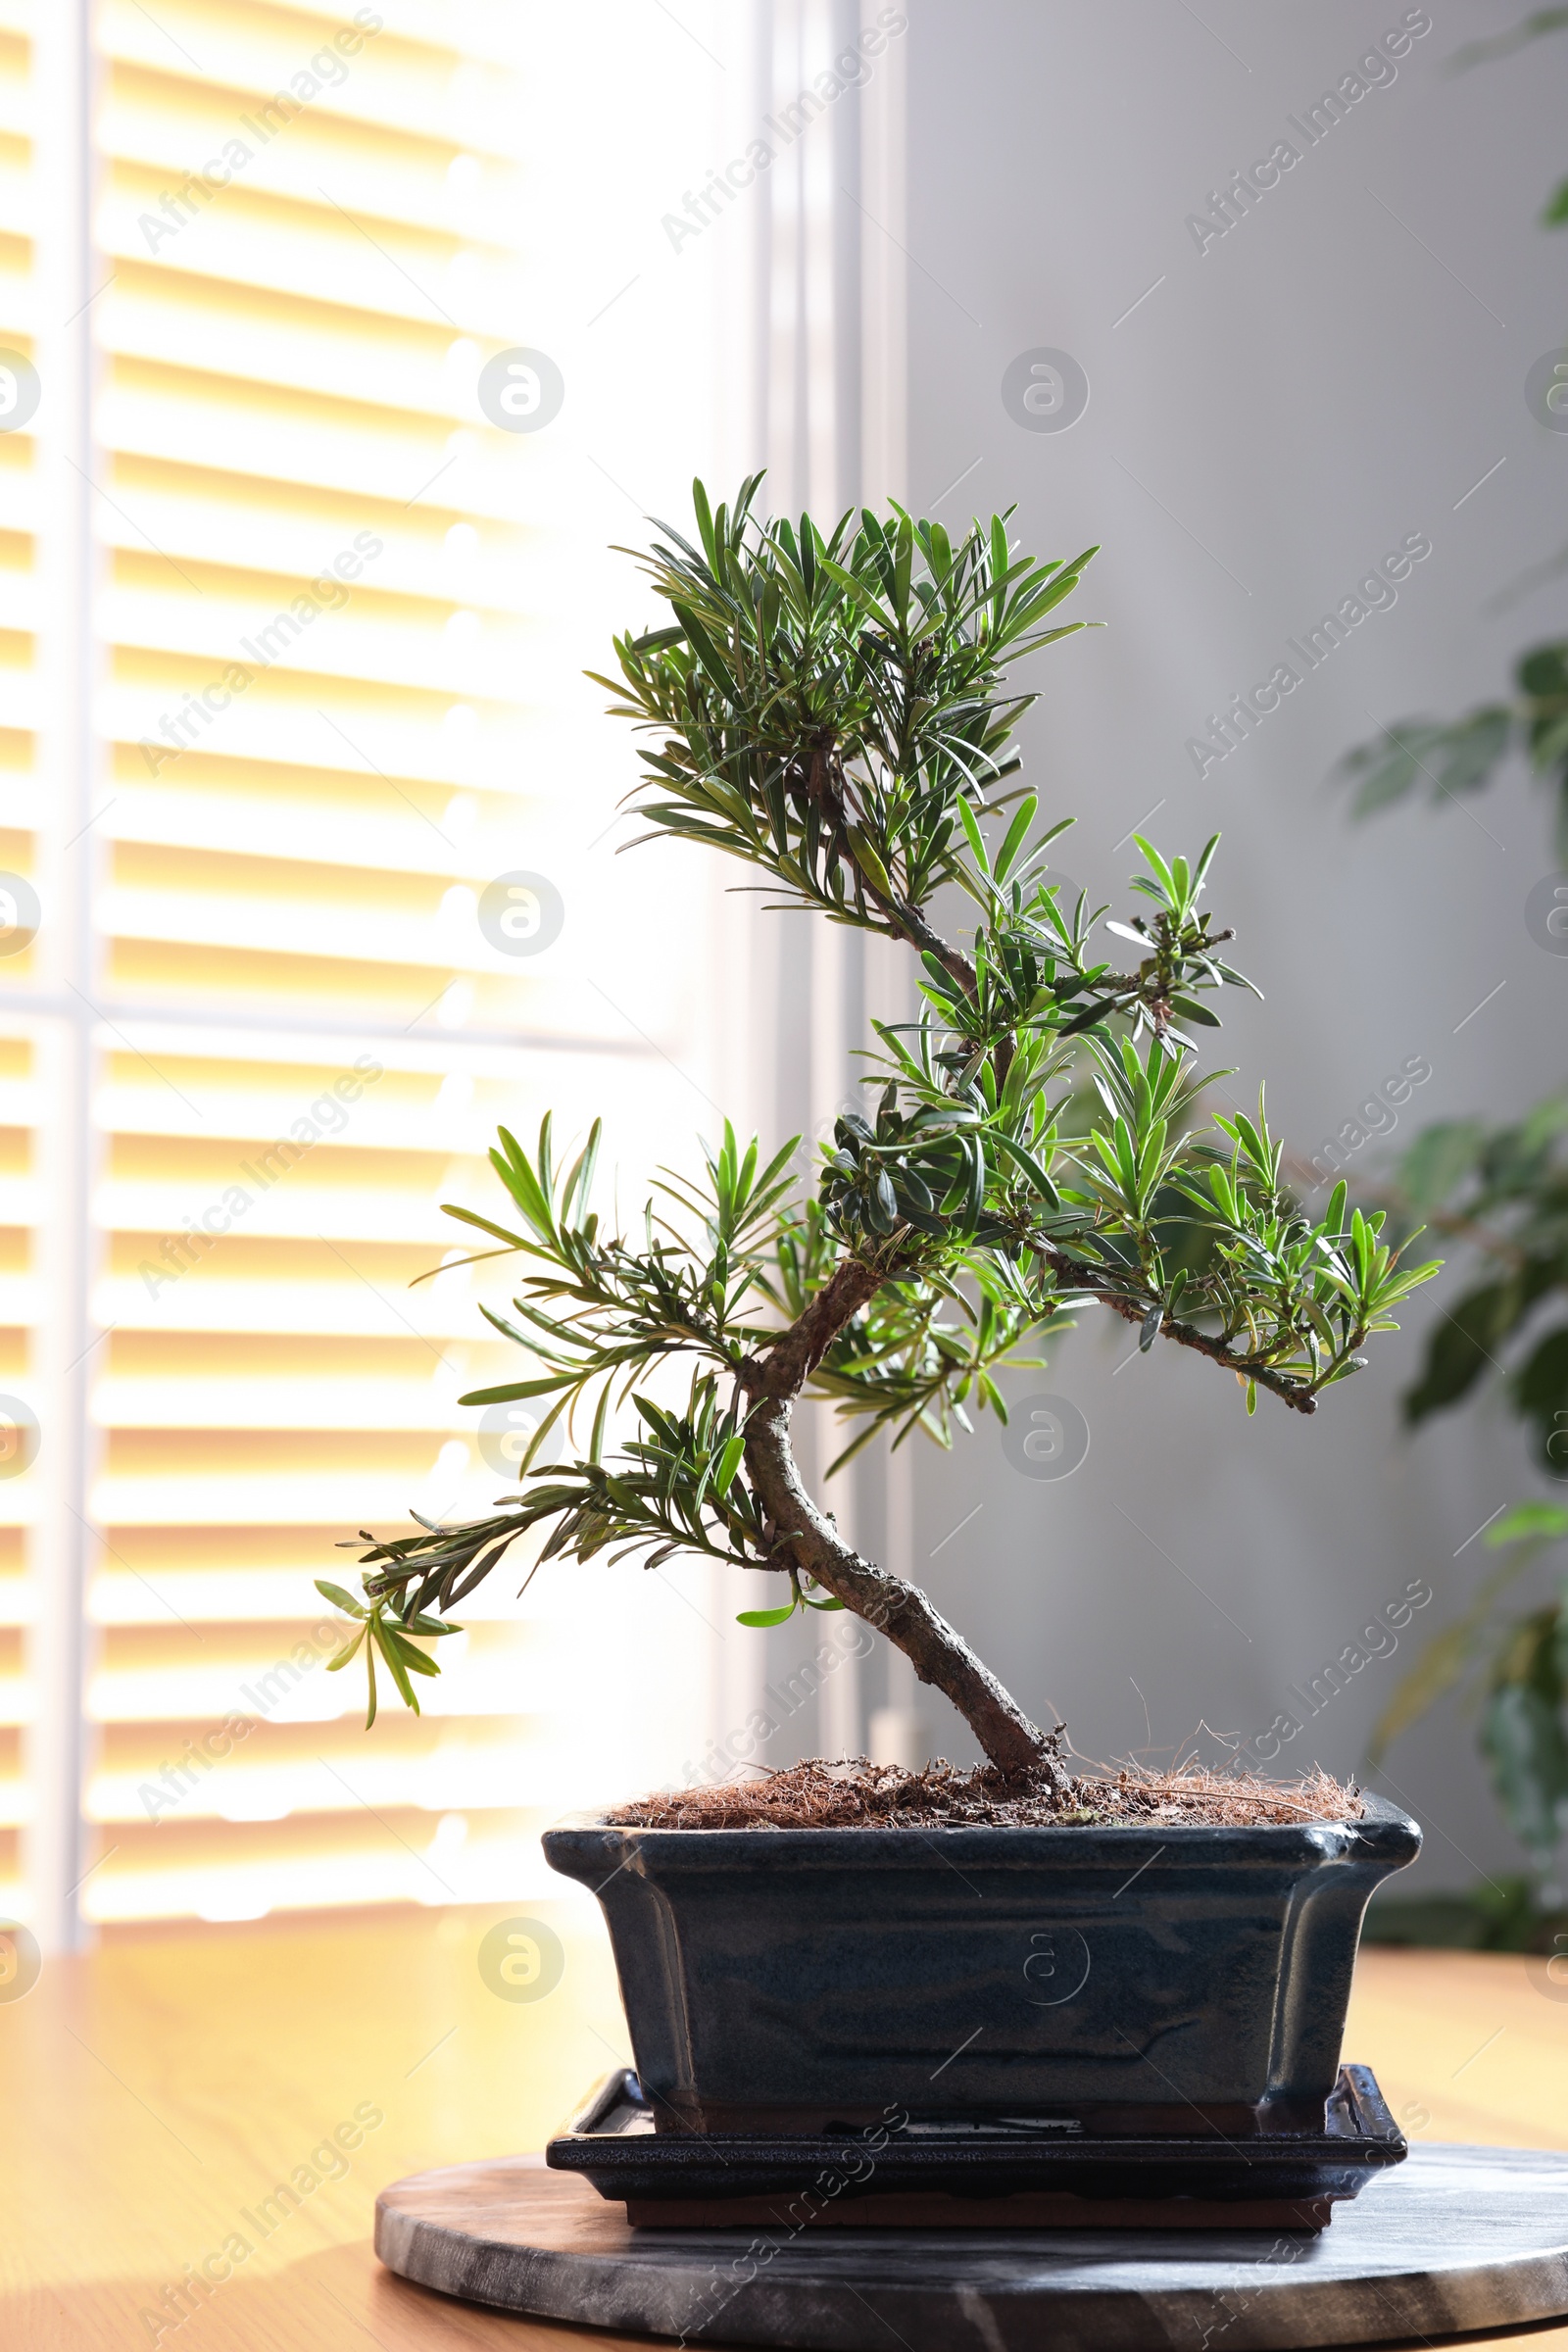 Photo of Japanese bonsai plant on wooden table near window. Creating zen atmosphere at home